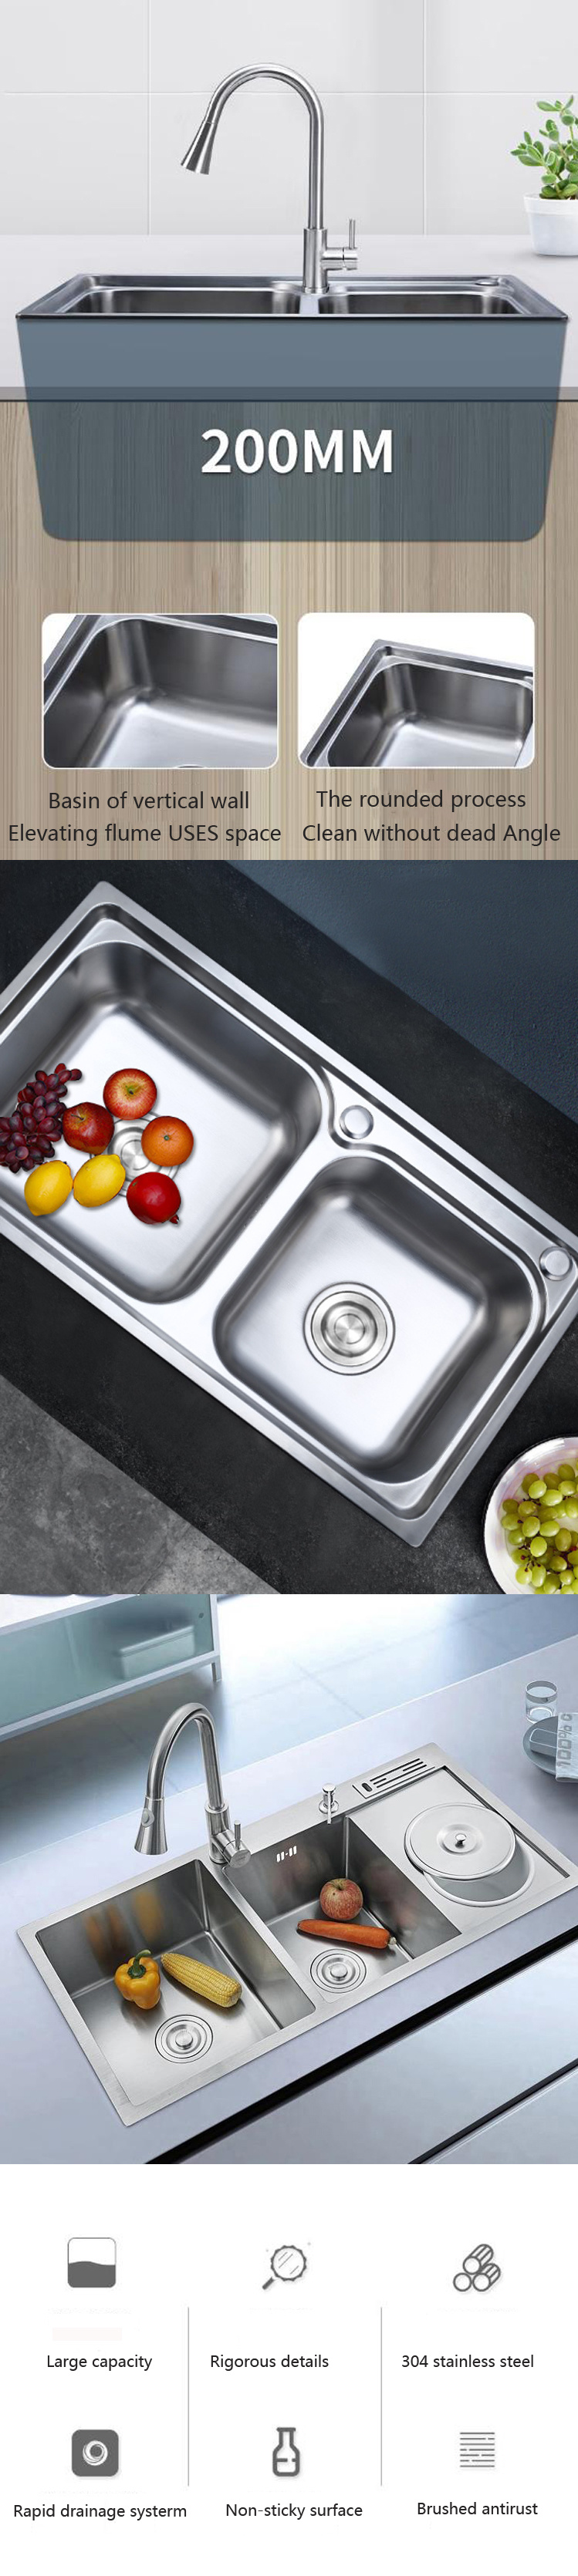 Double Bowl Sink with Vegetable Bowl